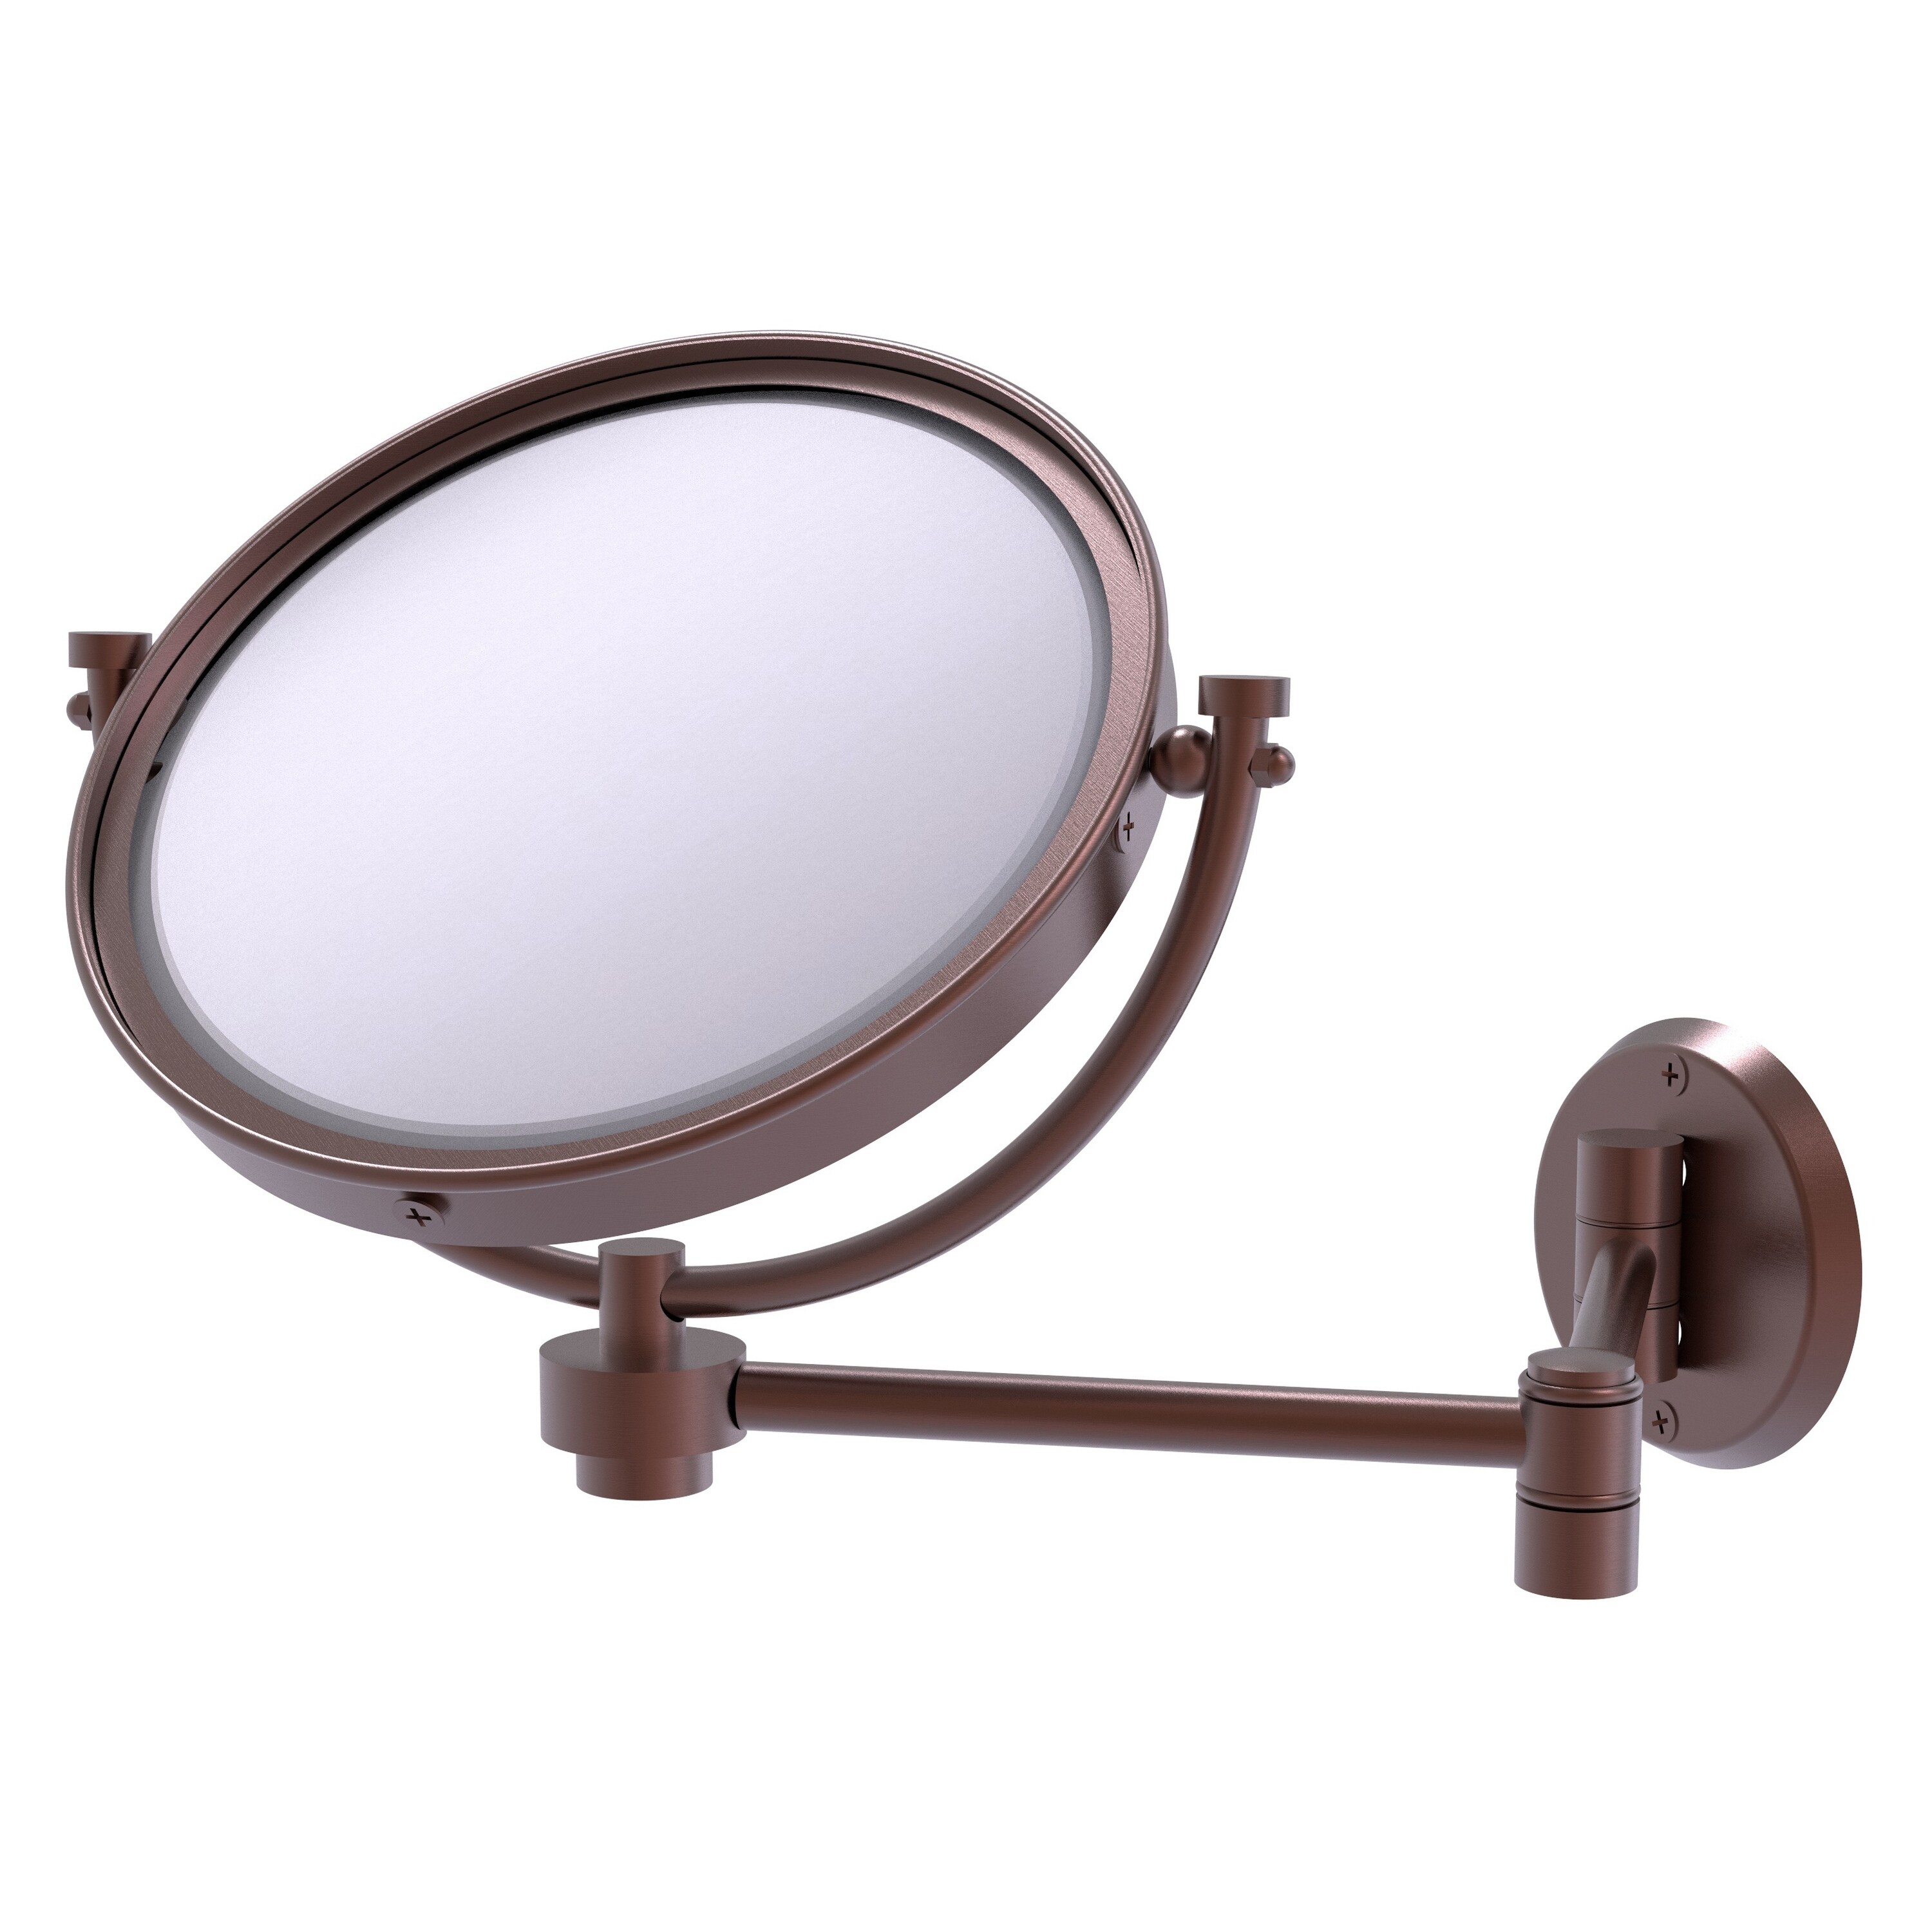 8-in x 10-in Antique Copper Double-sided 2X Magnifying Wall-mounted Vanity Mirror | - Allied Brass WM-6/2X-CA